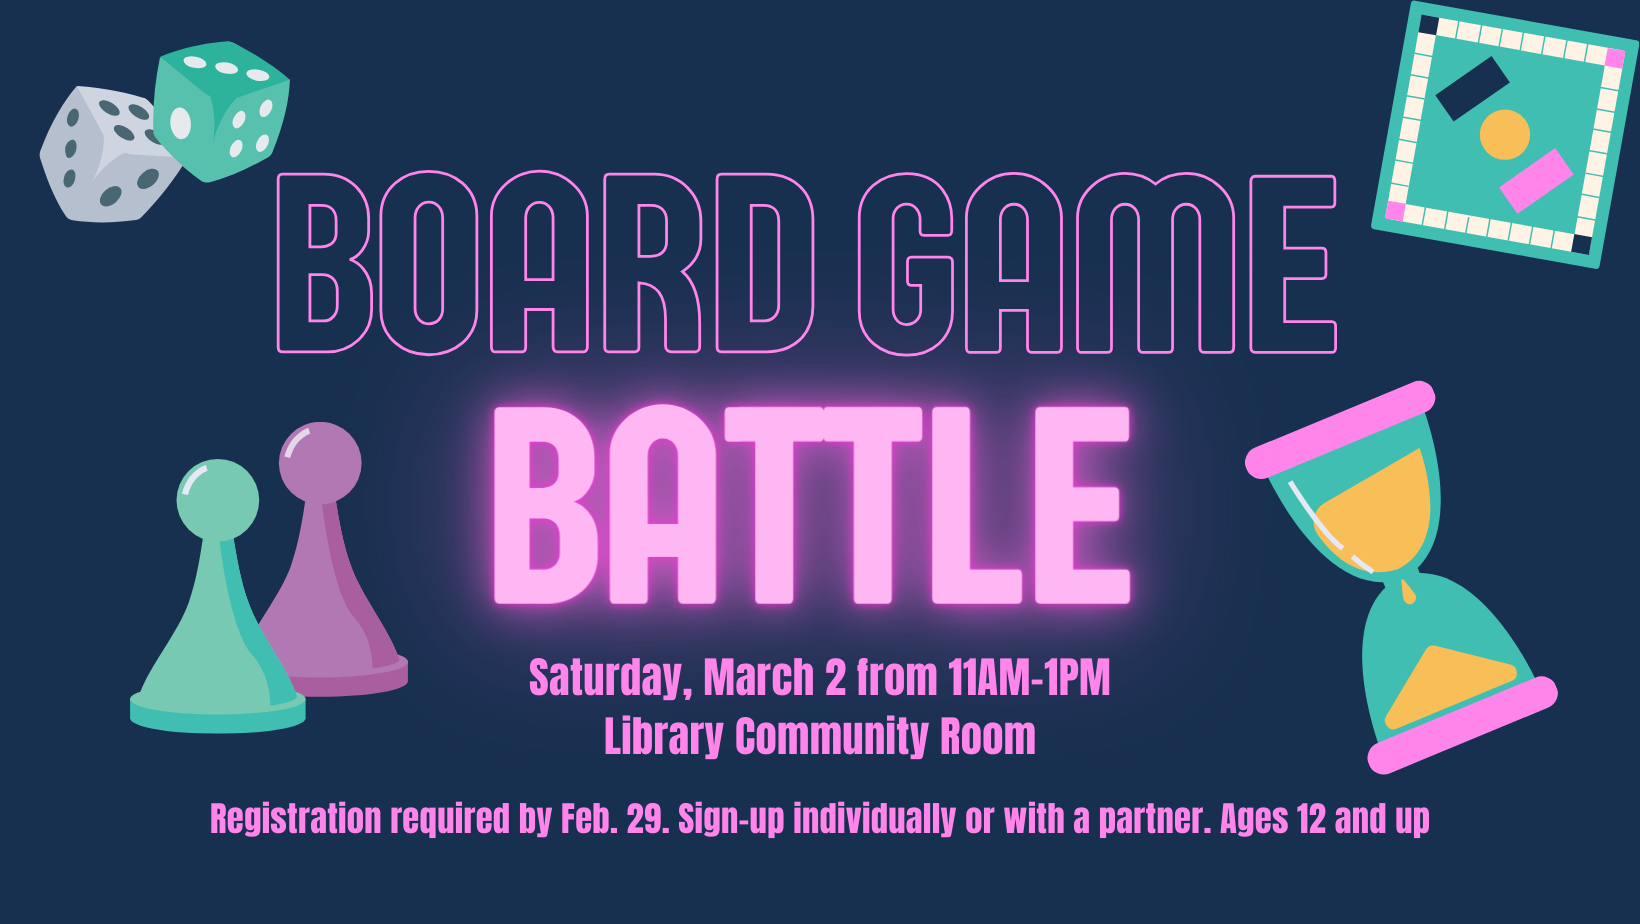 Board Game Battle on March 2 at 11am